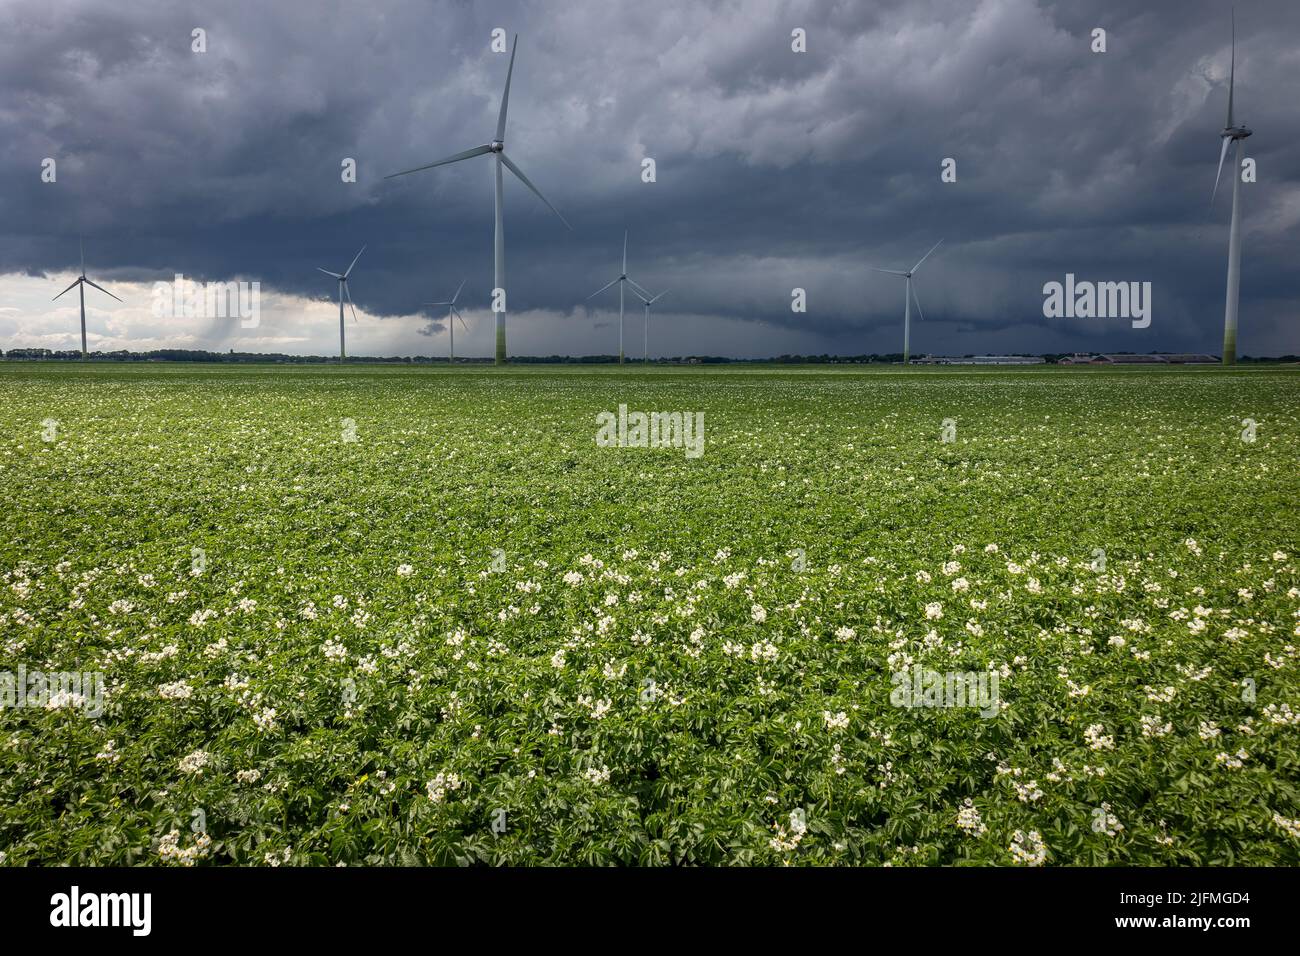 Potato growing on the farmland, on a stormy day with dark storm skies and wind turbines in the background Stock Photo